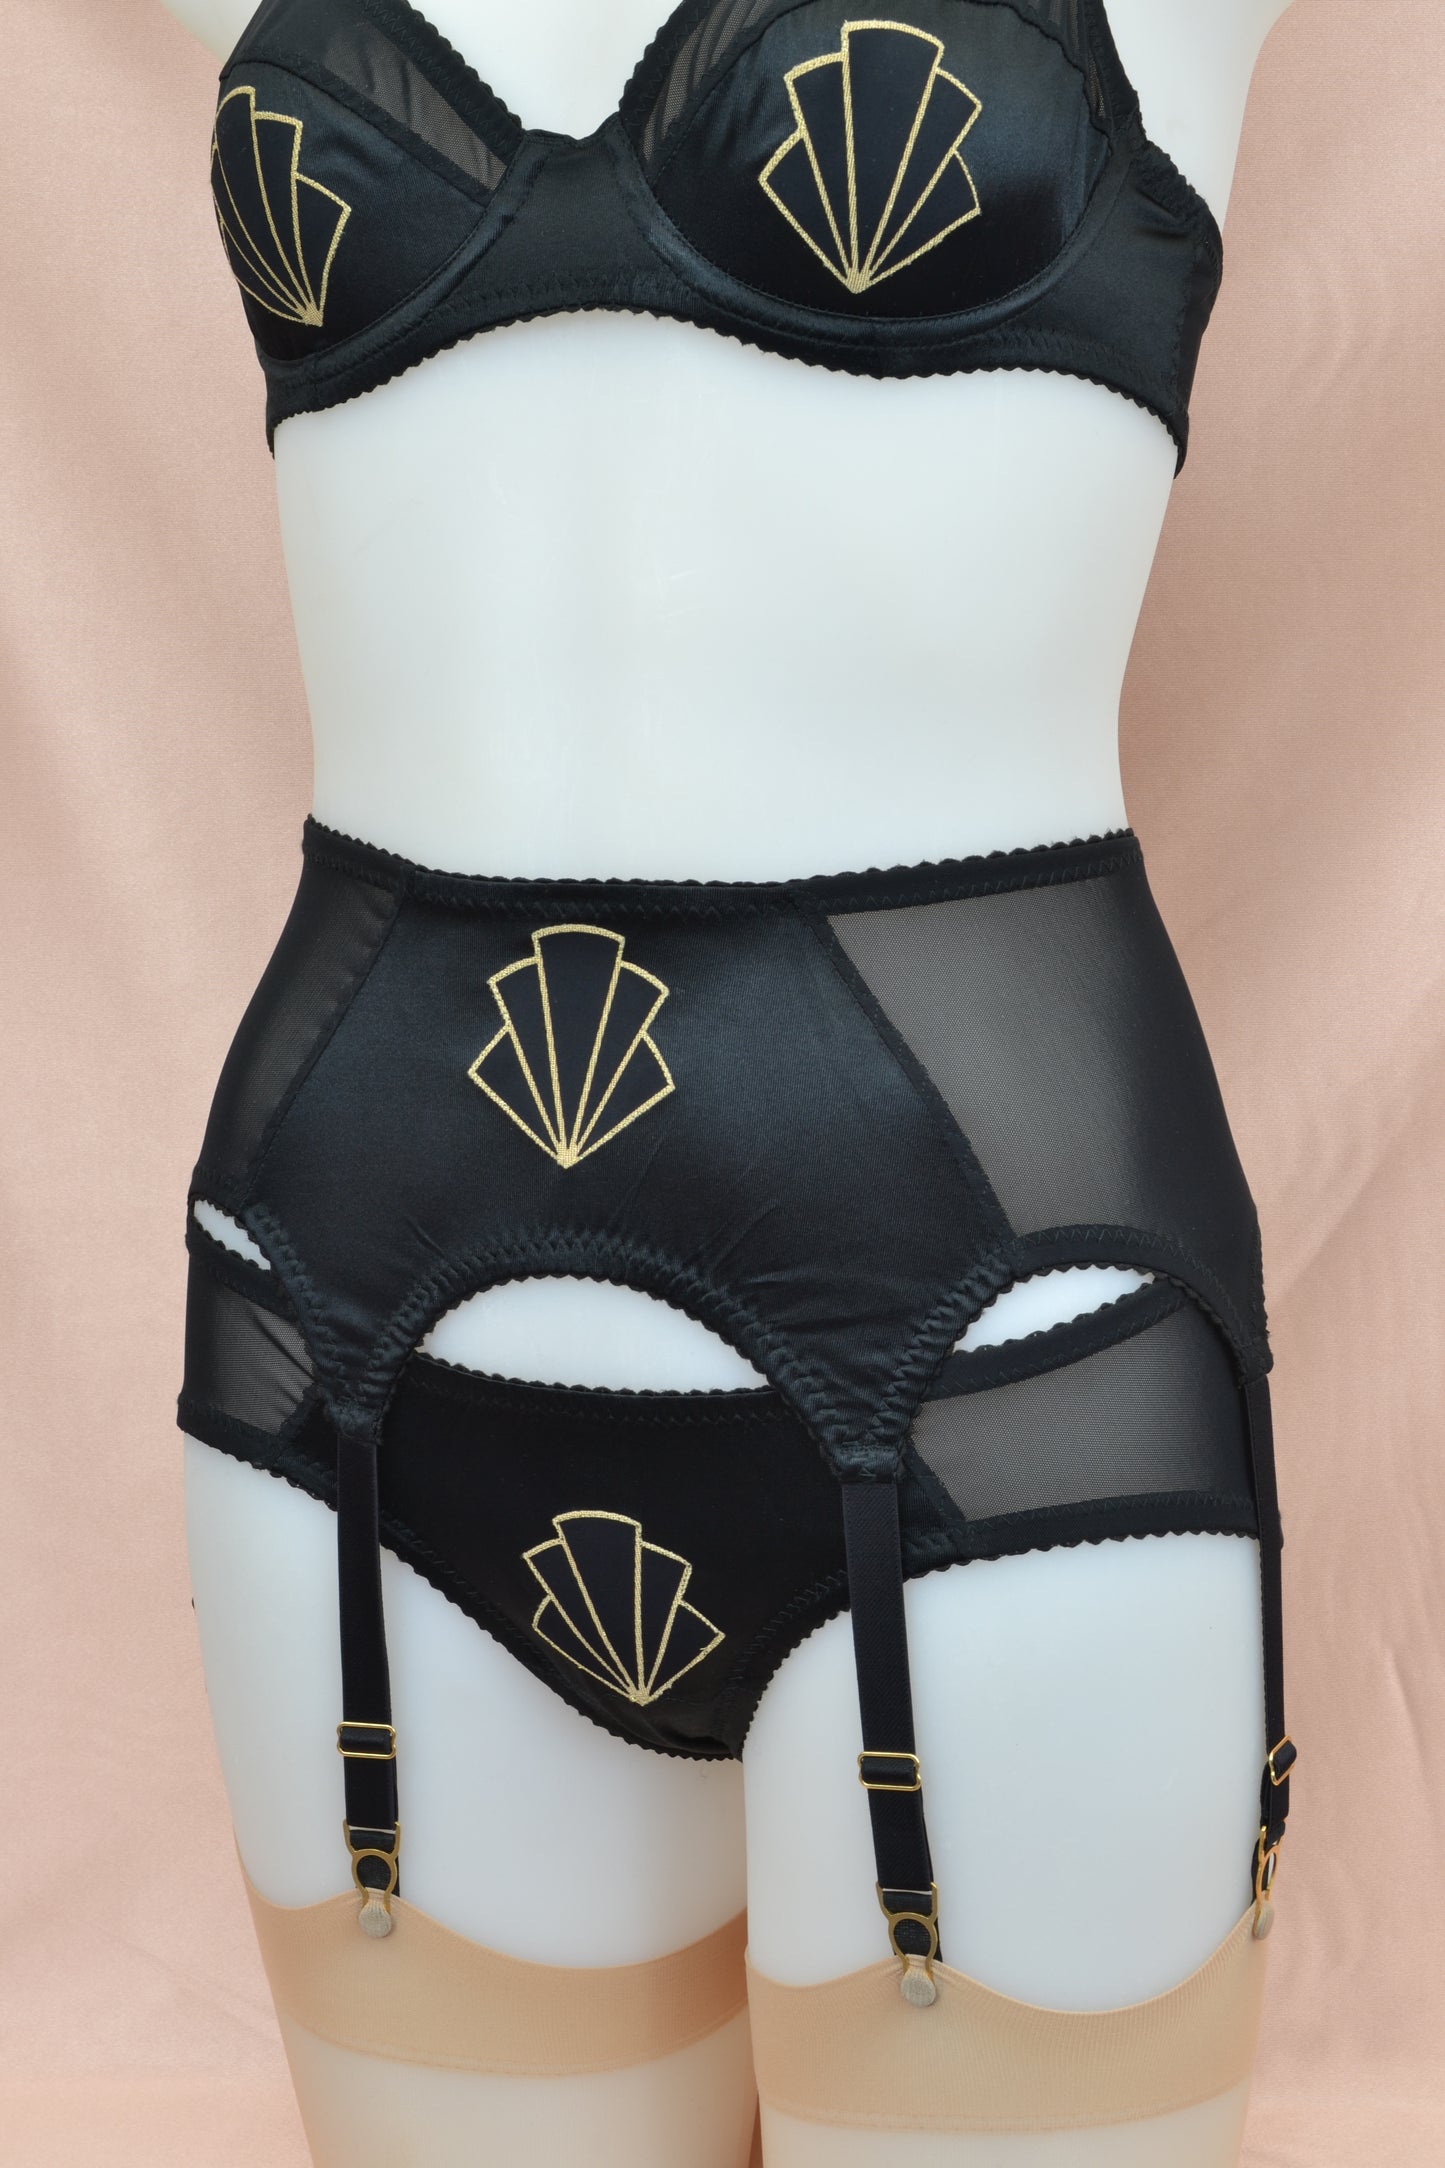 1920s inspired lingerie with art deco style black and gold motif. 1930s vintage style underwear, perfect for great Gatsby themes events. Art deco underwired bra with retro motif, six strap suspender belt and classic cut pantie knicker. Gold hardwear and garter clips. Burlesque lingerie and underwear made in the UK. 